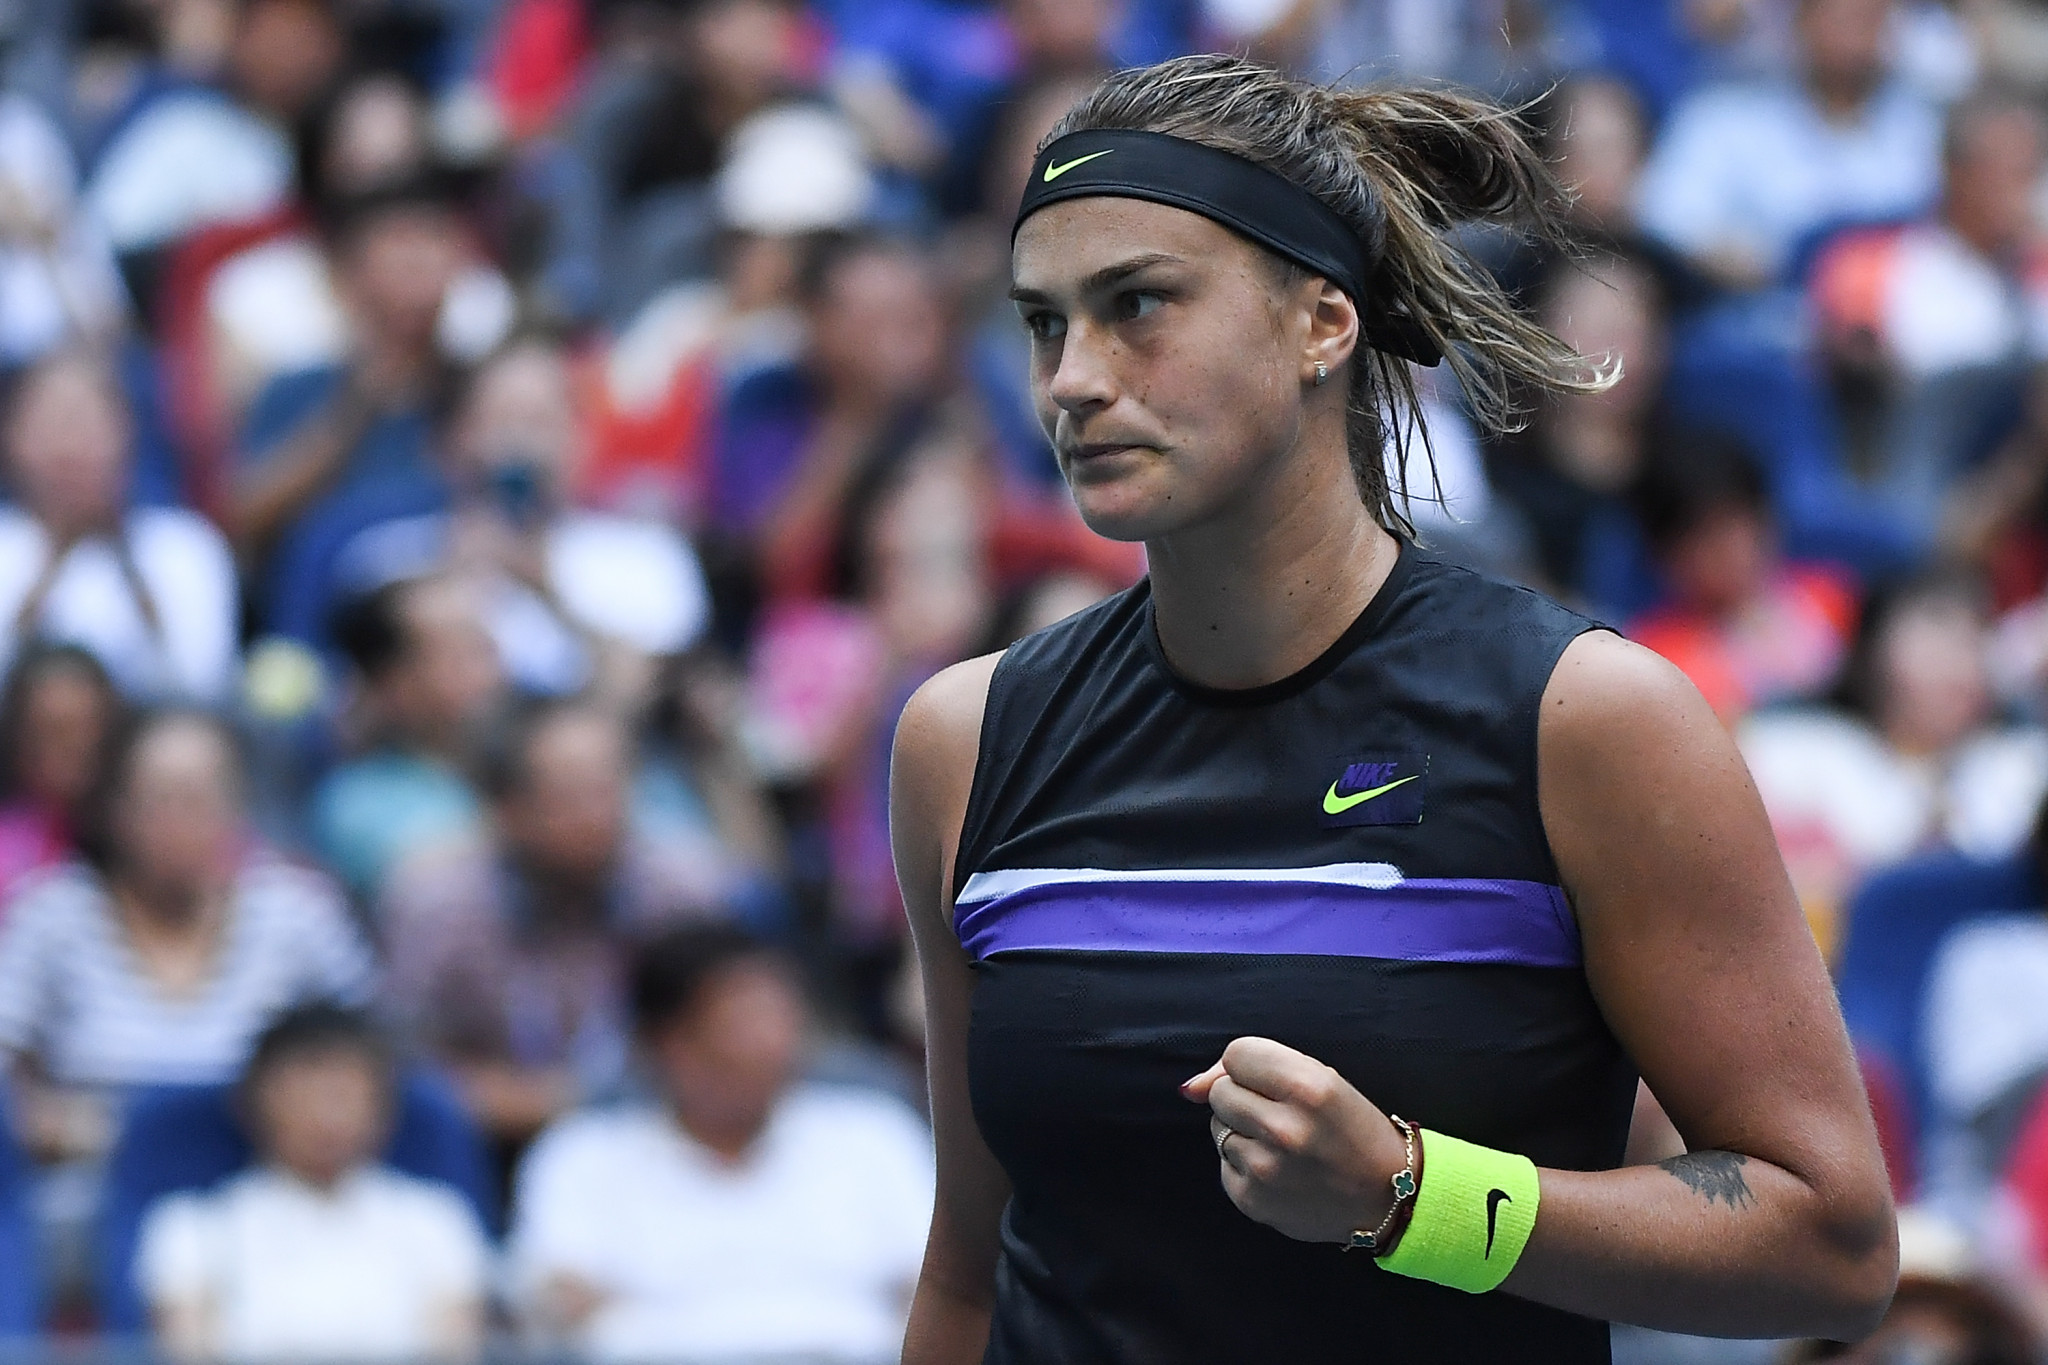 Aryna Sabalenka has become the first ever player to successfully defend the Wuhan Open title after beating Alison Riske in three sets ©Getty Images